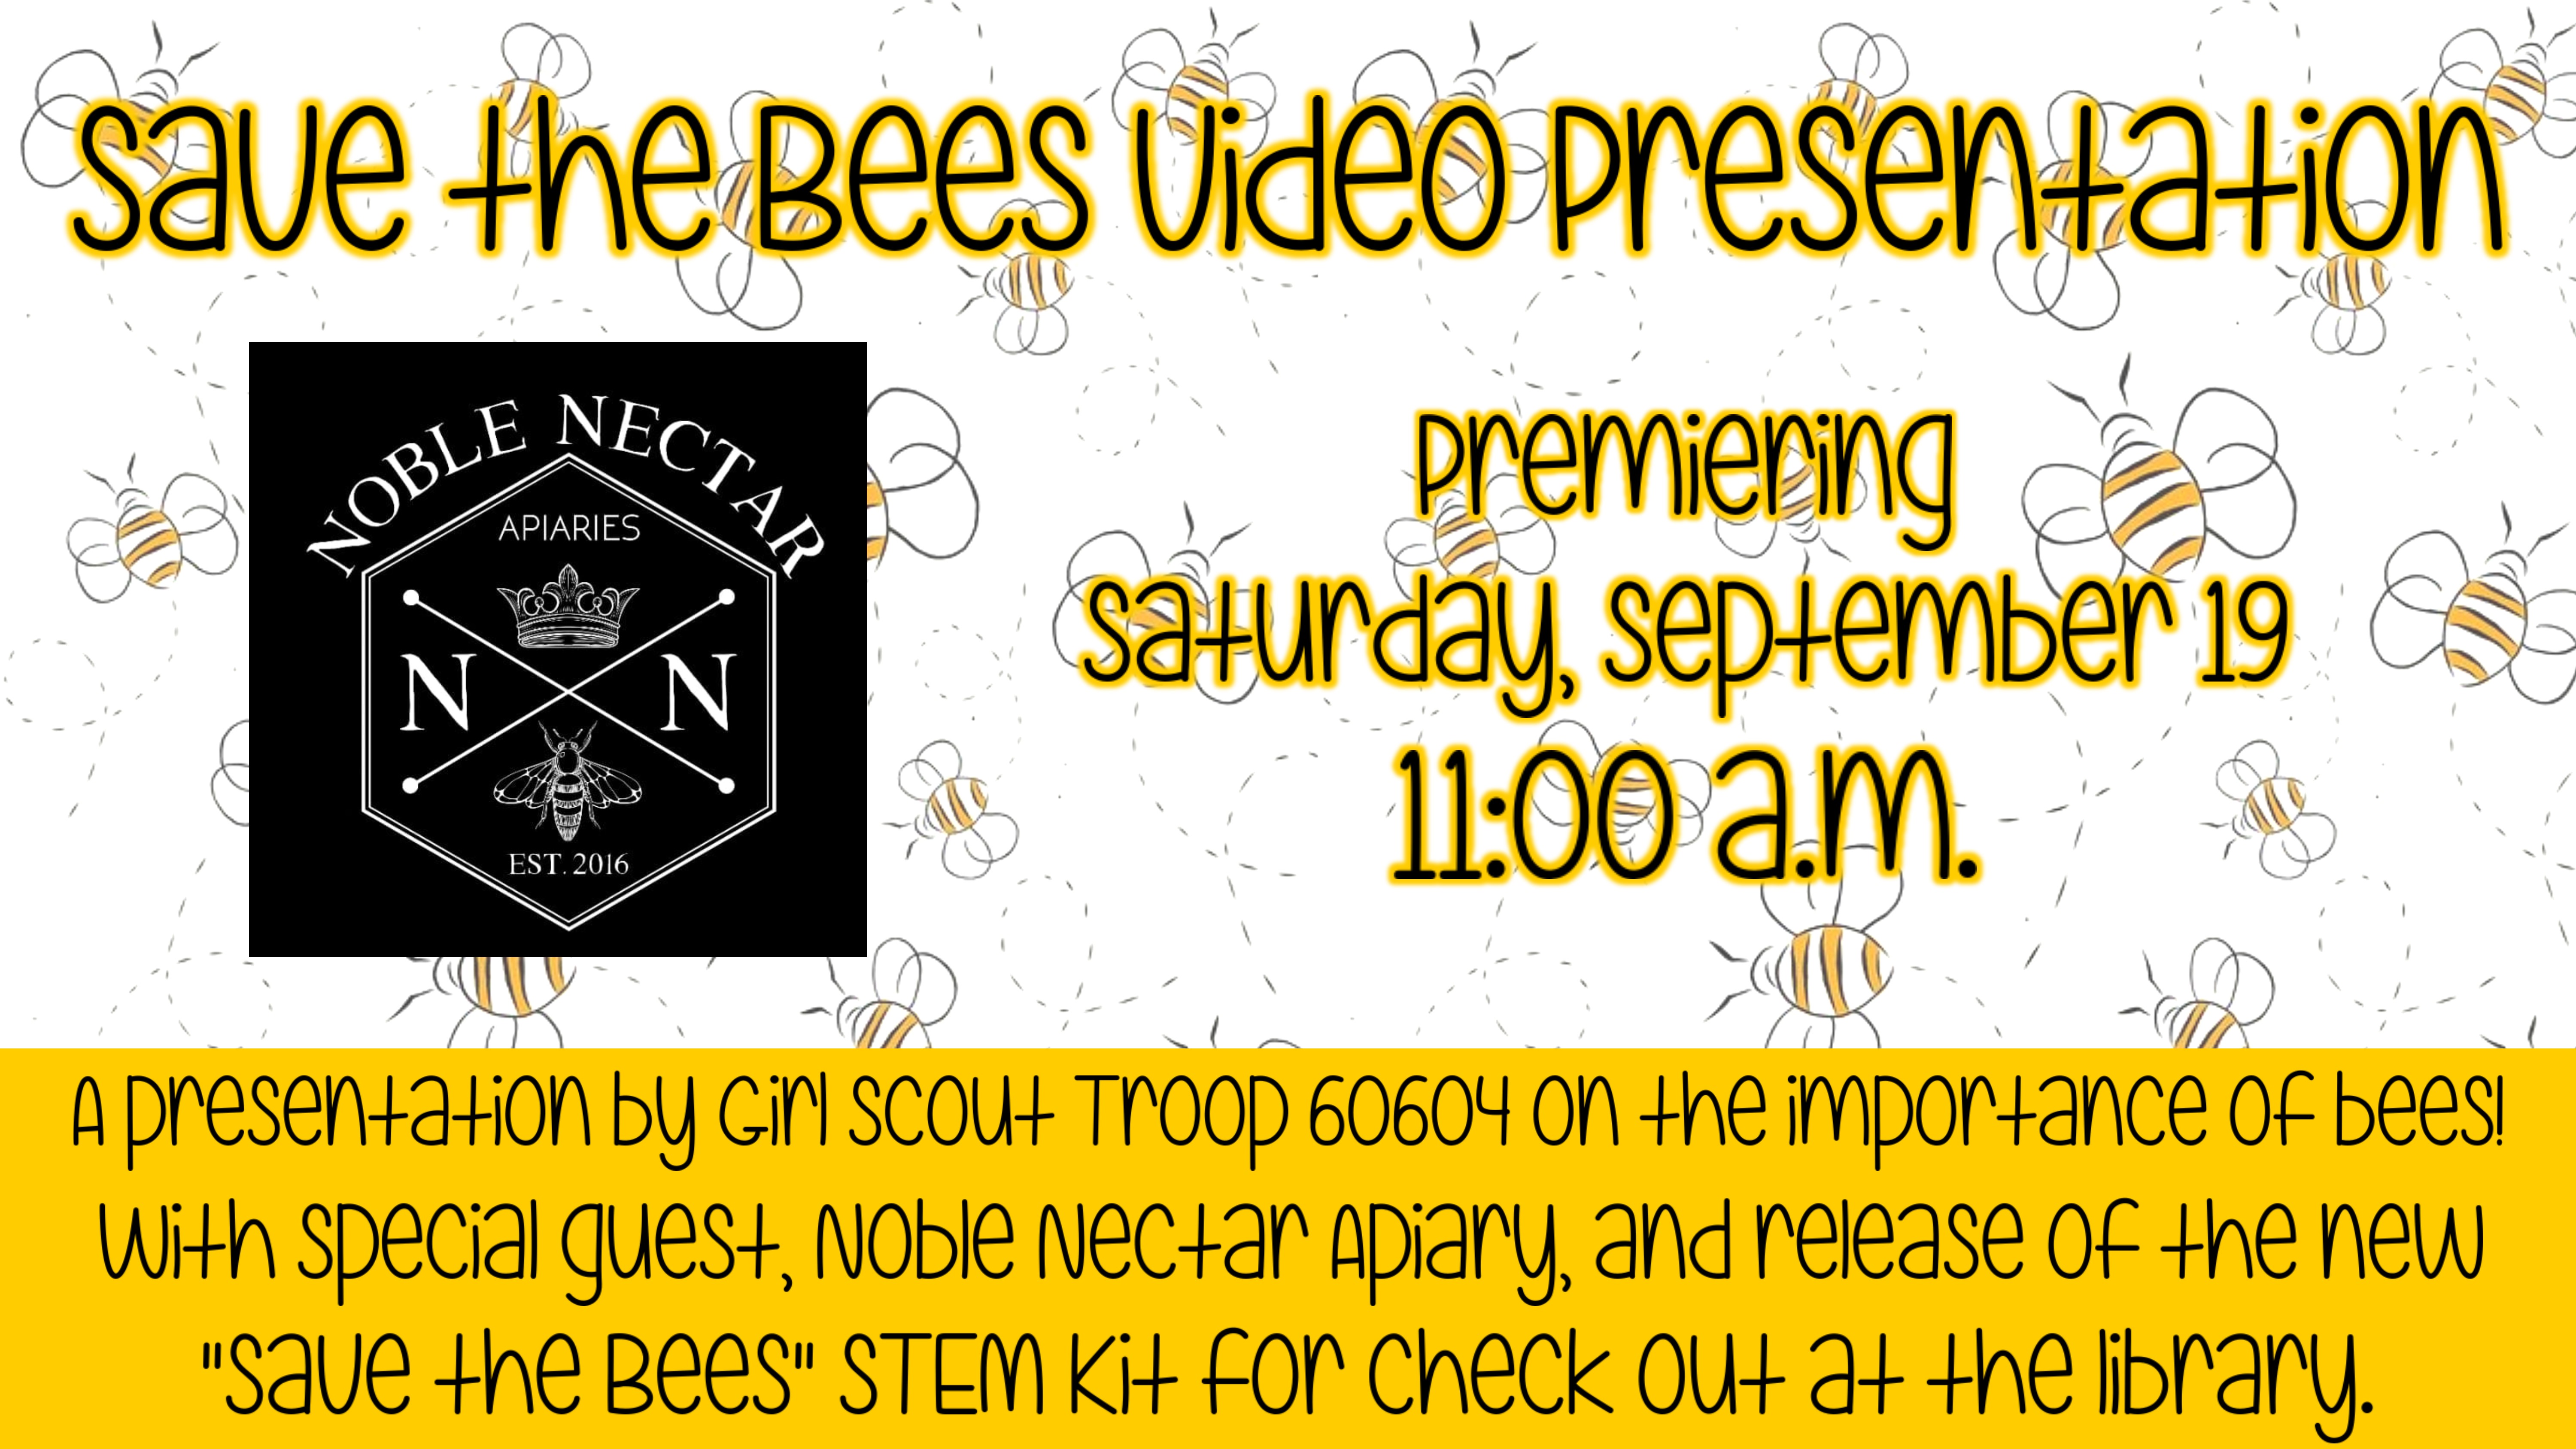 Save the Bees Video Presentation information with Noble Nectar Apiary logo 